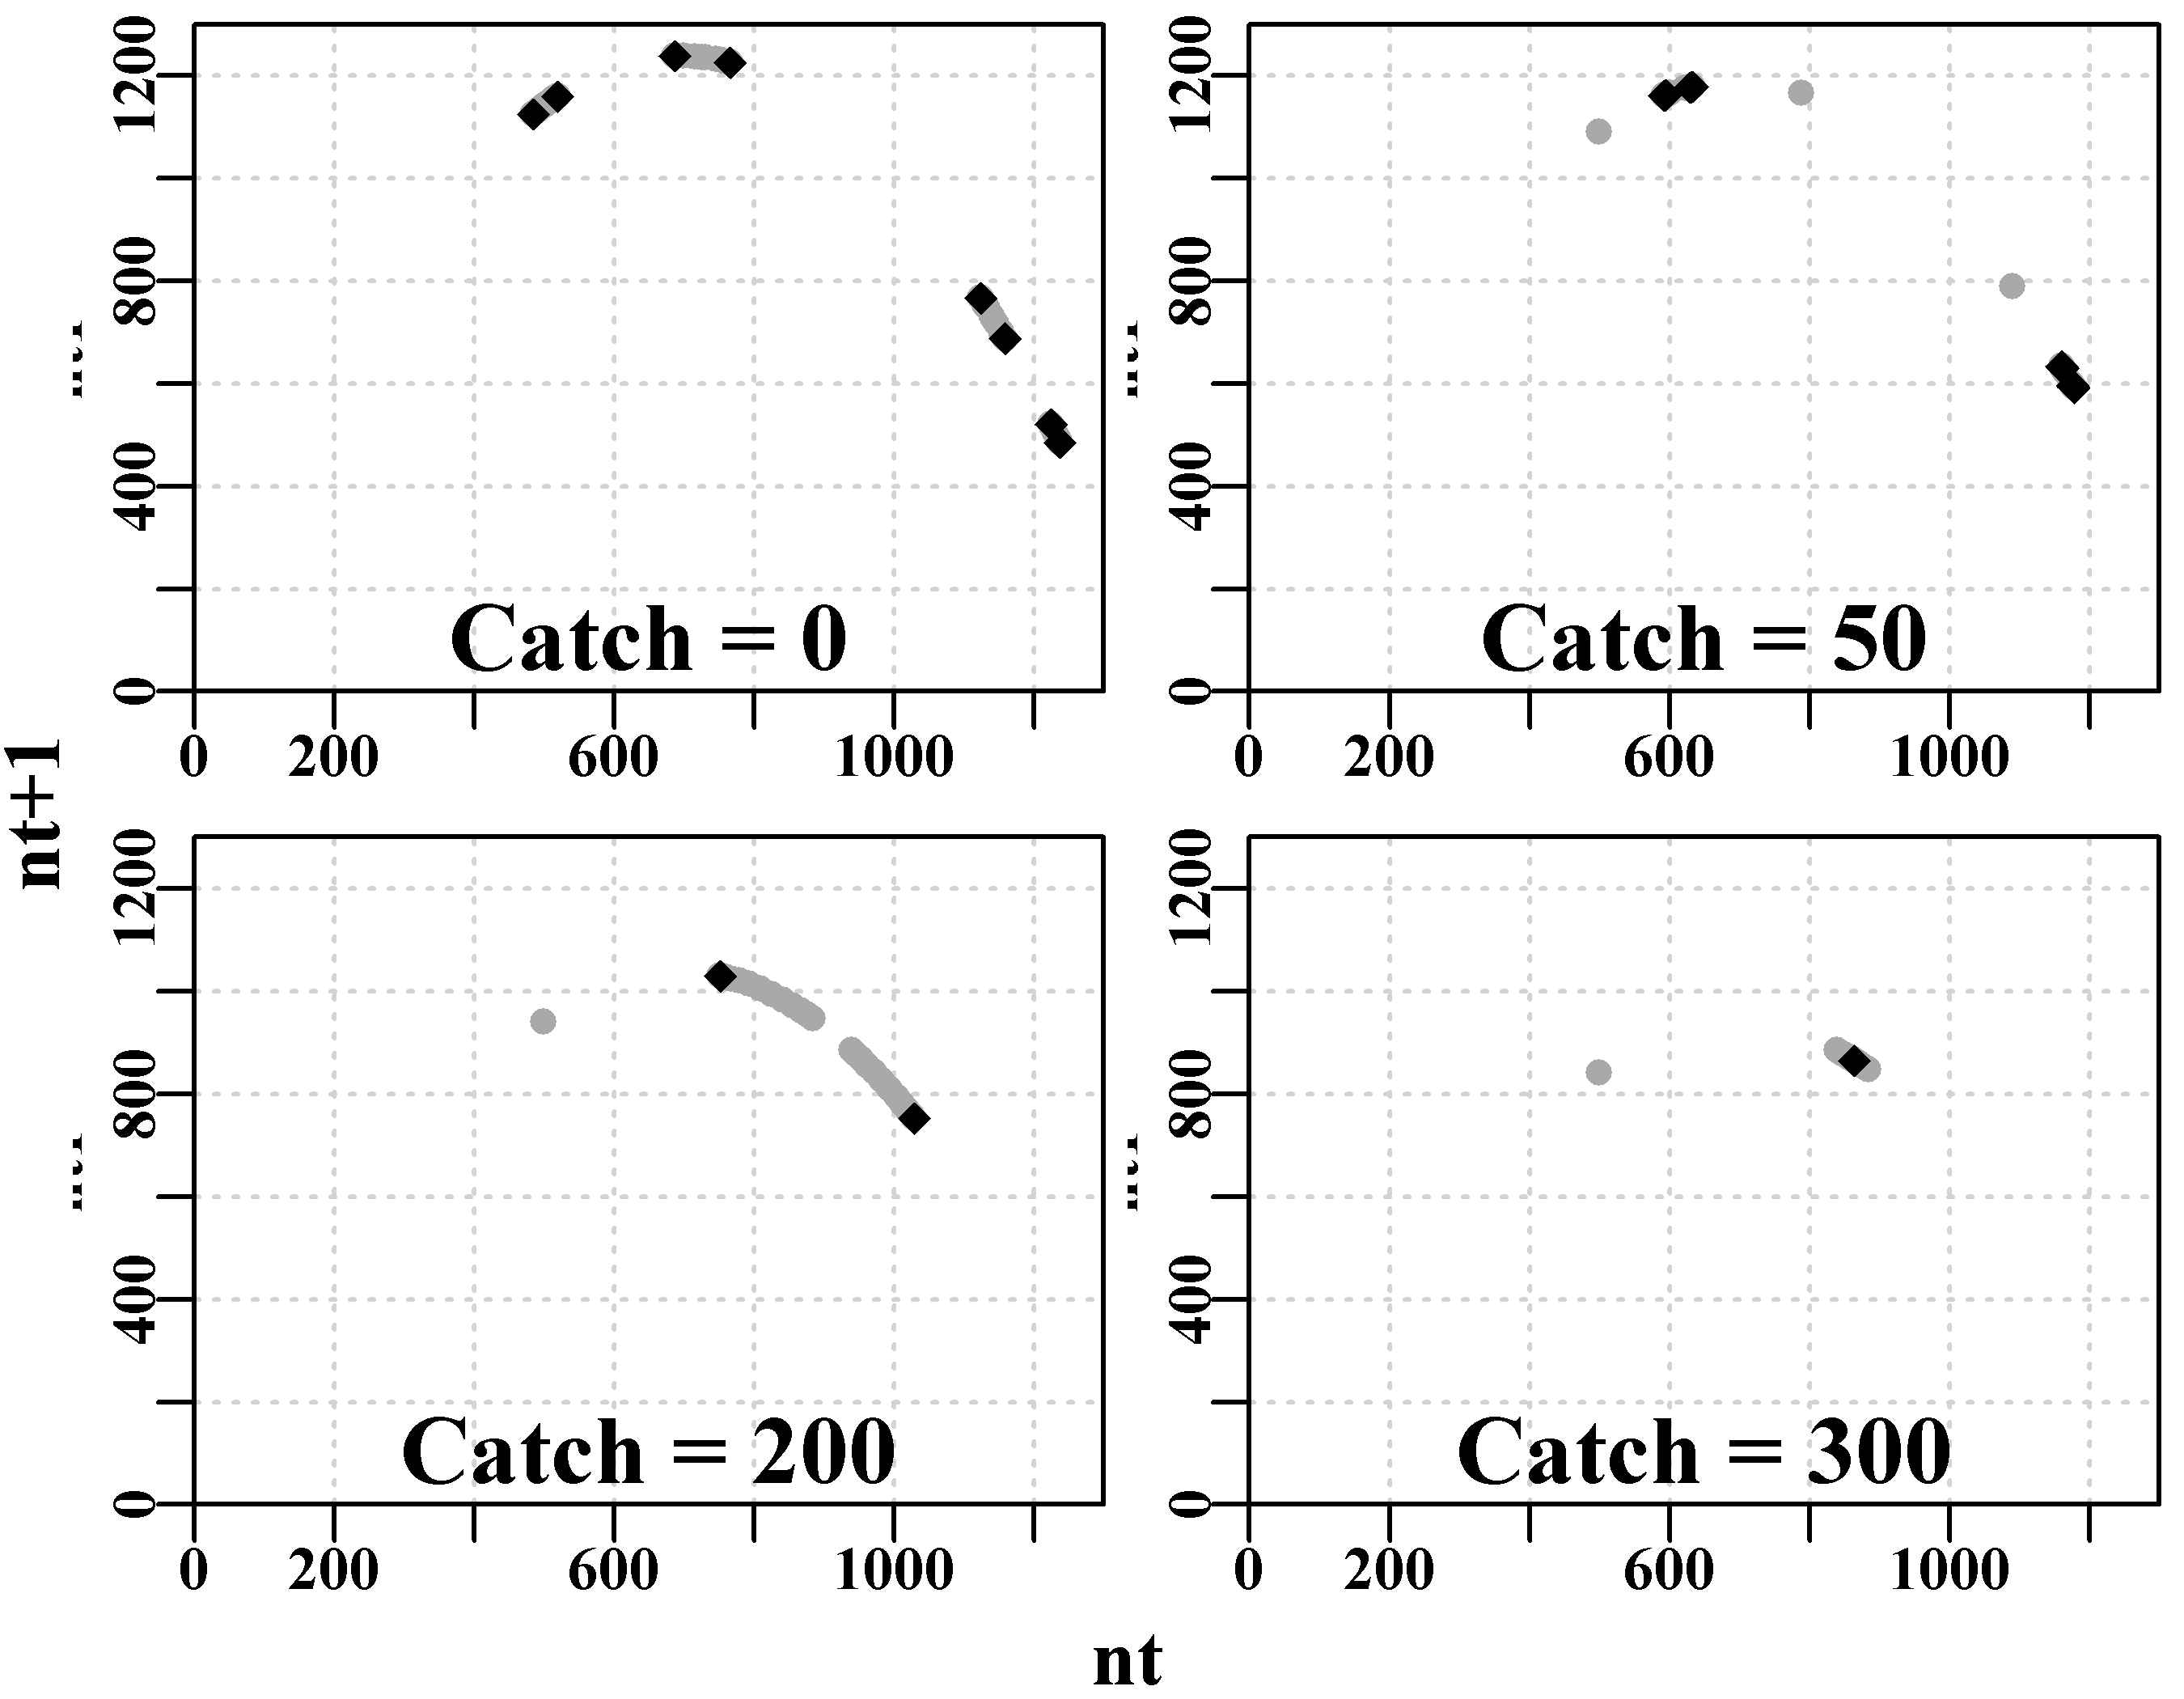 Schaefer model dynamics. Phase plots for each of the four constant catch scenarios.